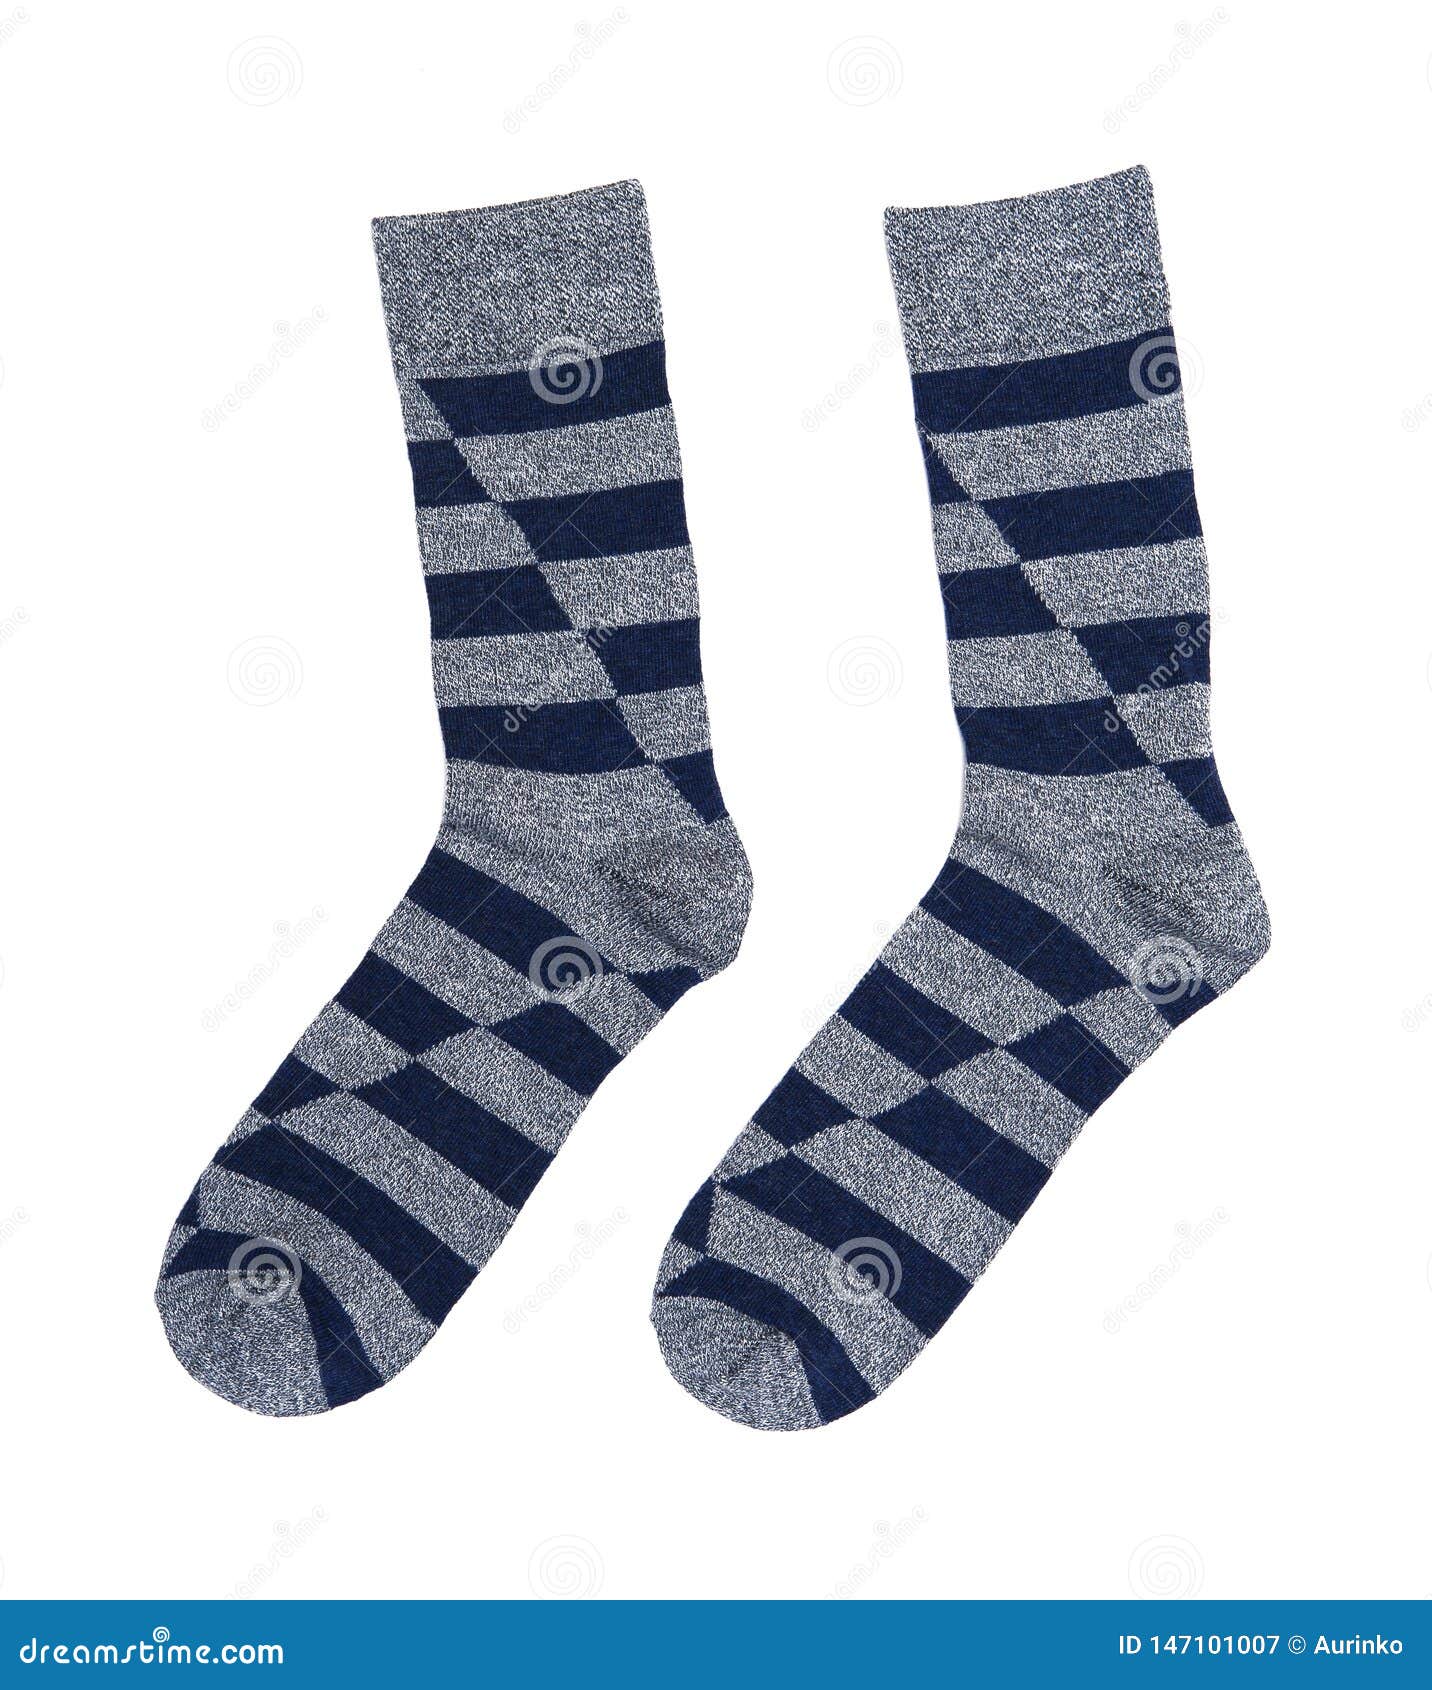 Socks Isolated on the White Stock Image - Image of feet, pair: 147101007